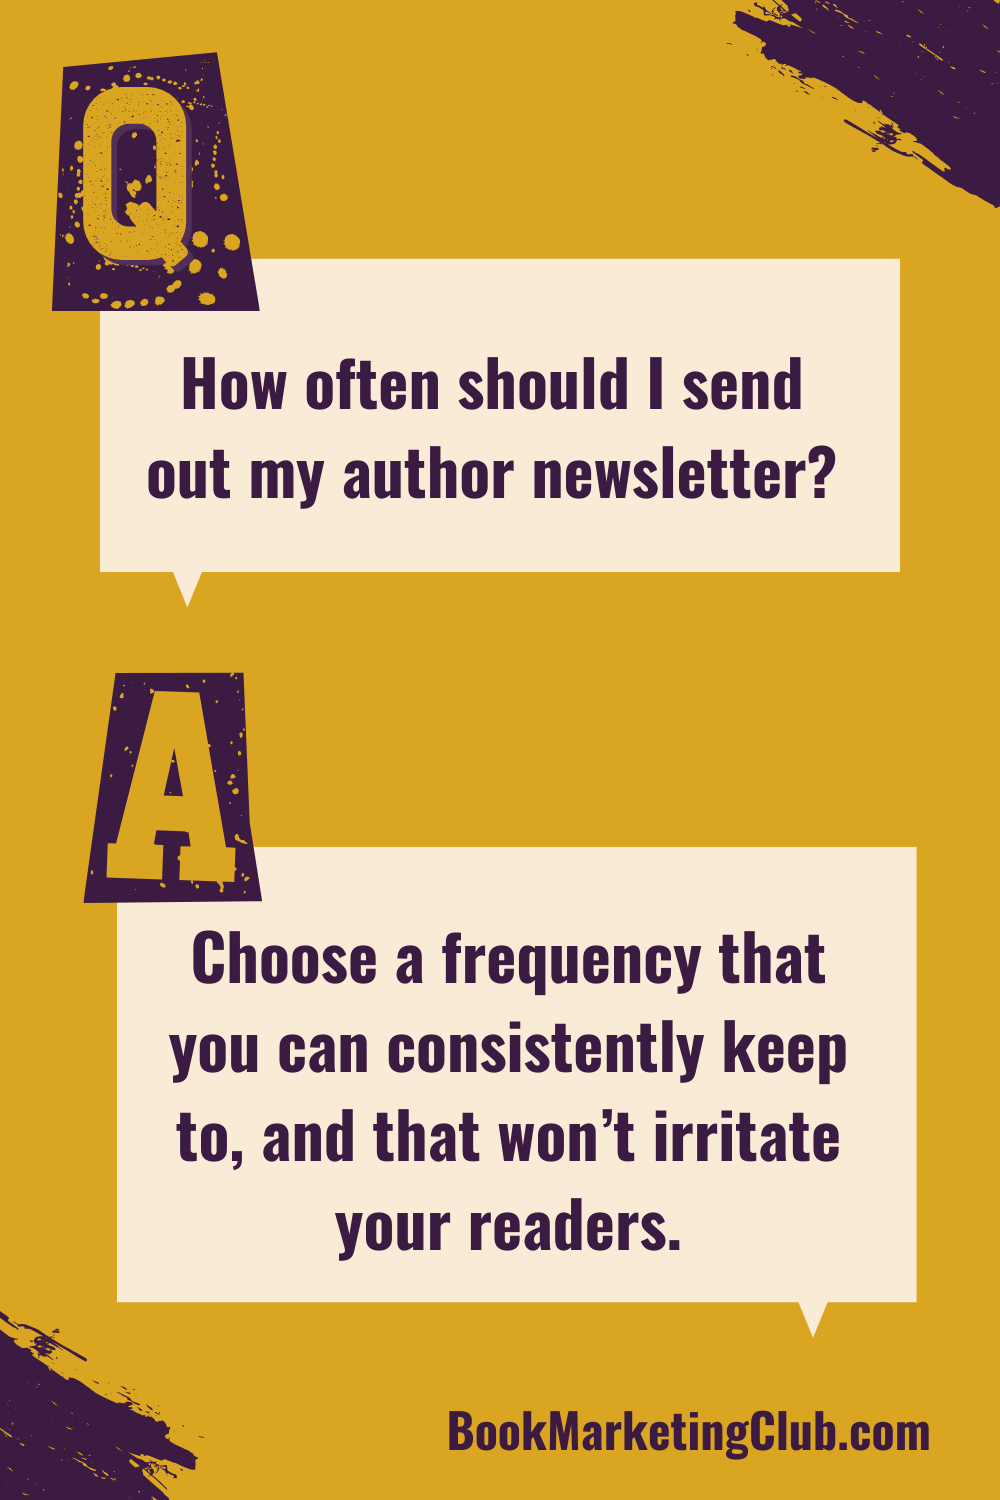 How often should I send an author newsletter